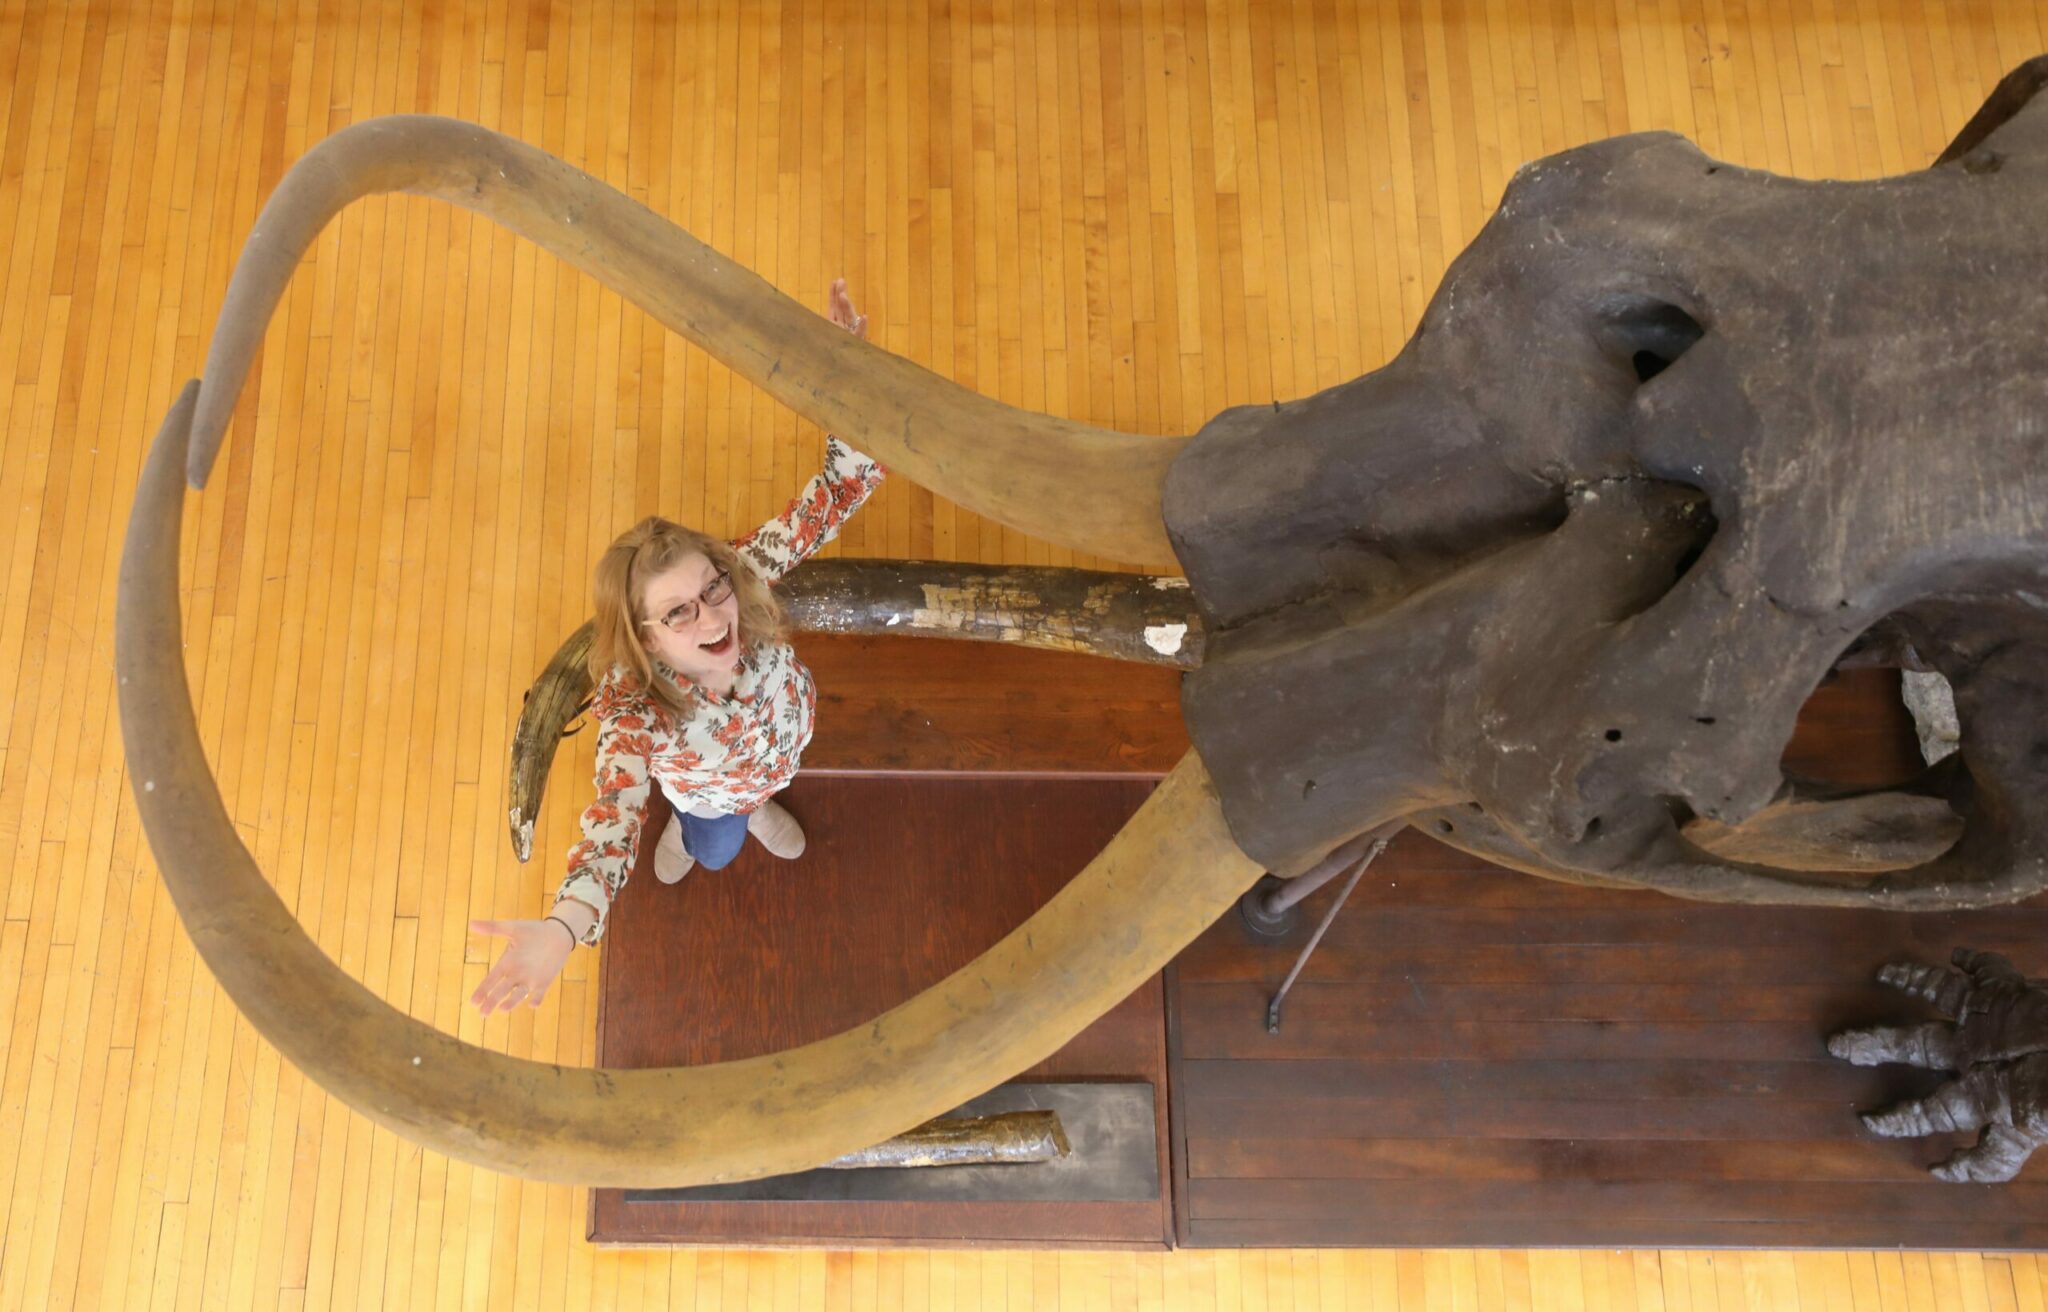 what is the difference between a mastodon and a woolly mammoth and how do you tell them apart